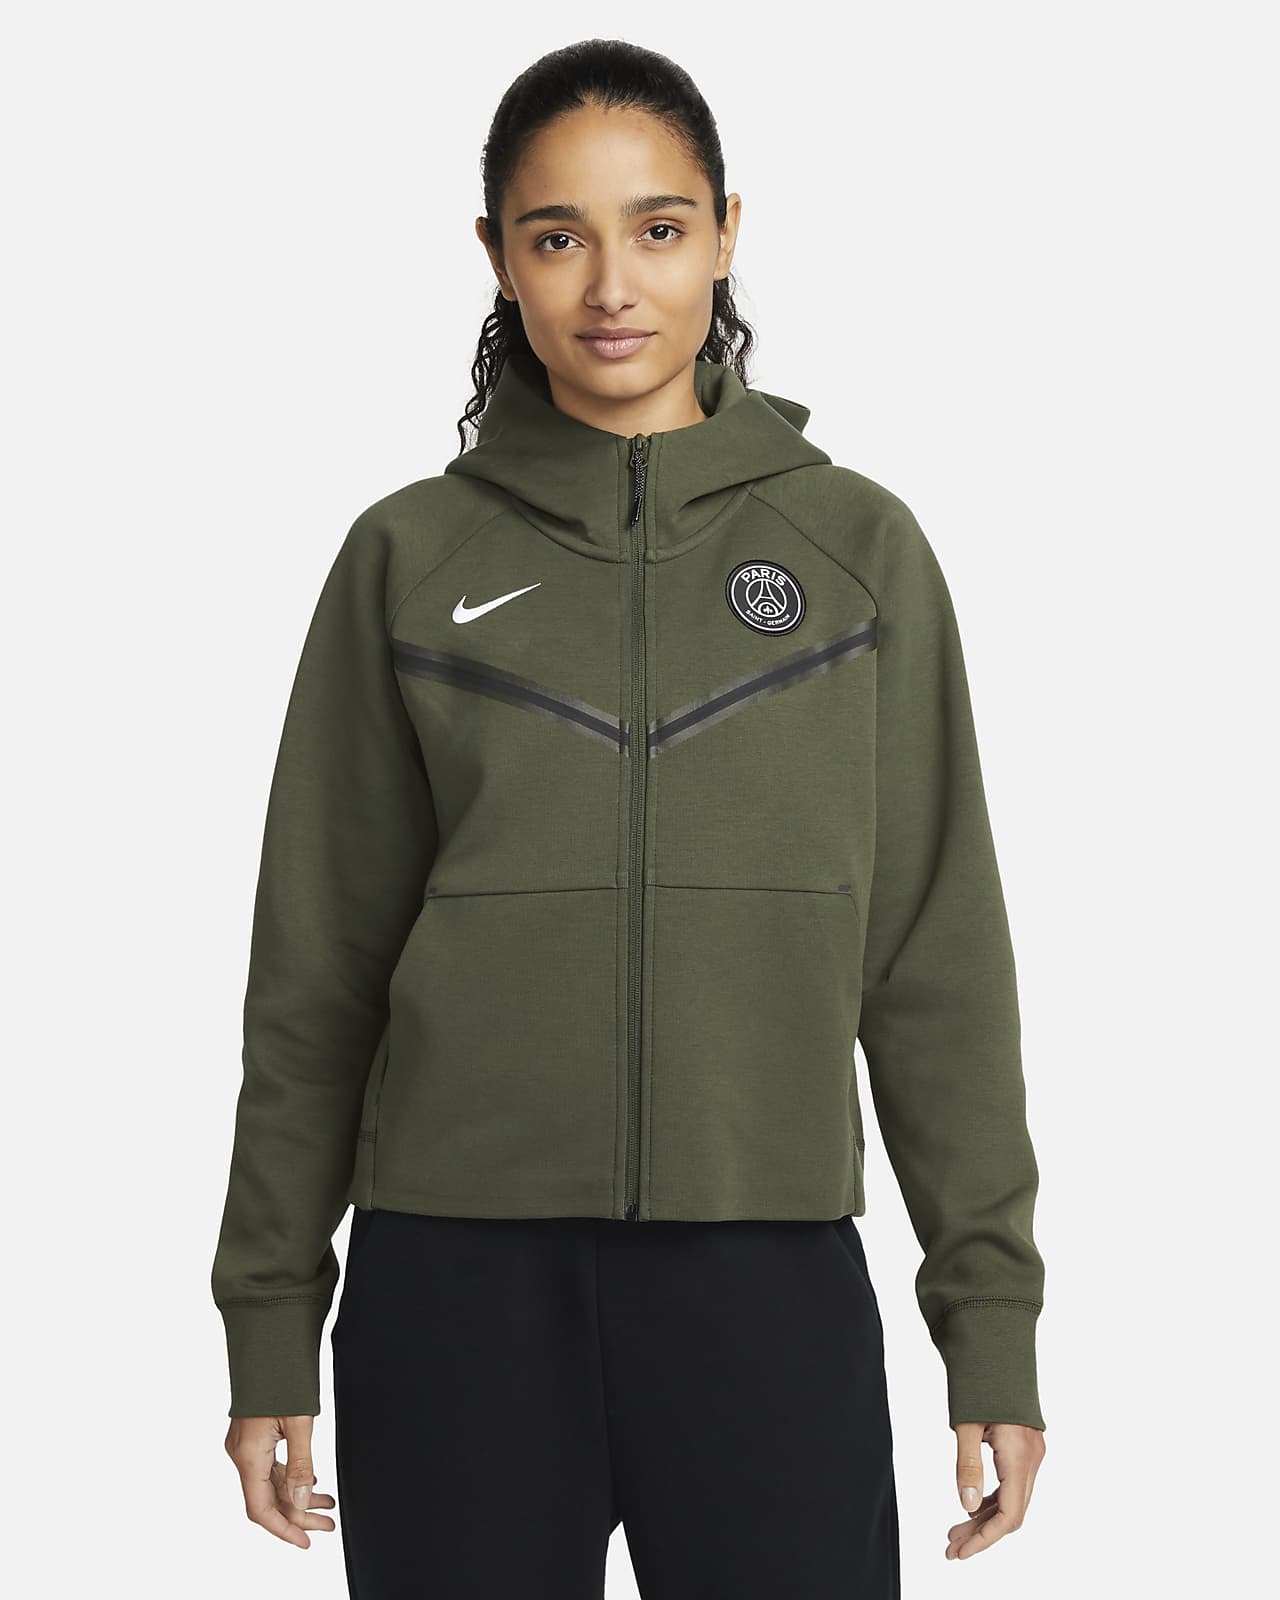 The guests Ship shape Large quantity nike tech fleece windrunner